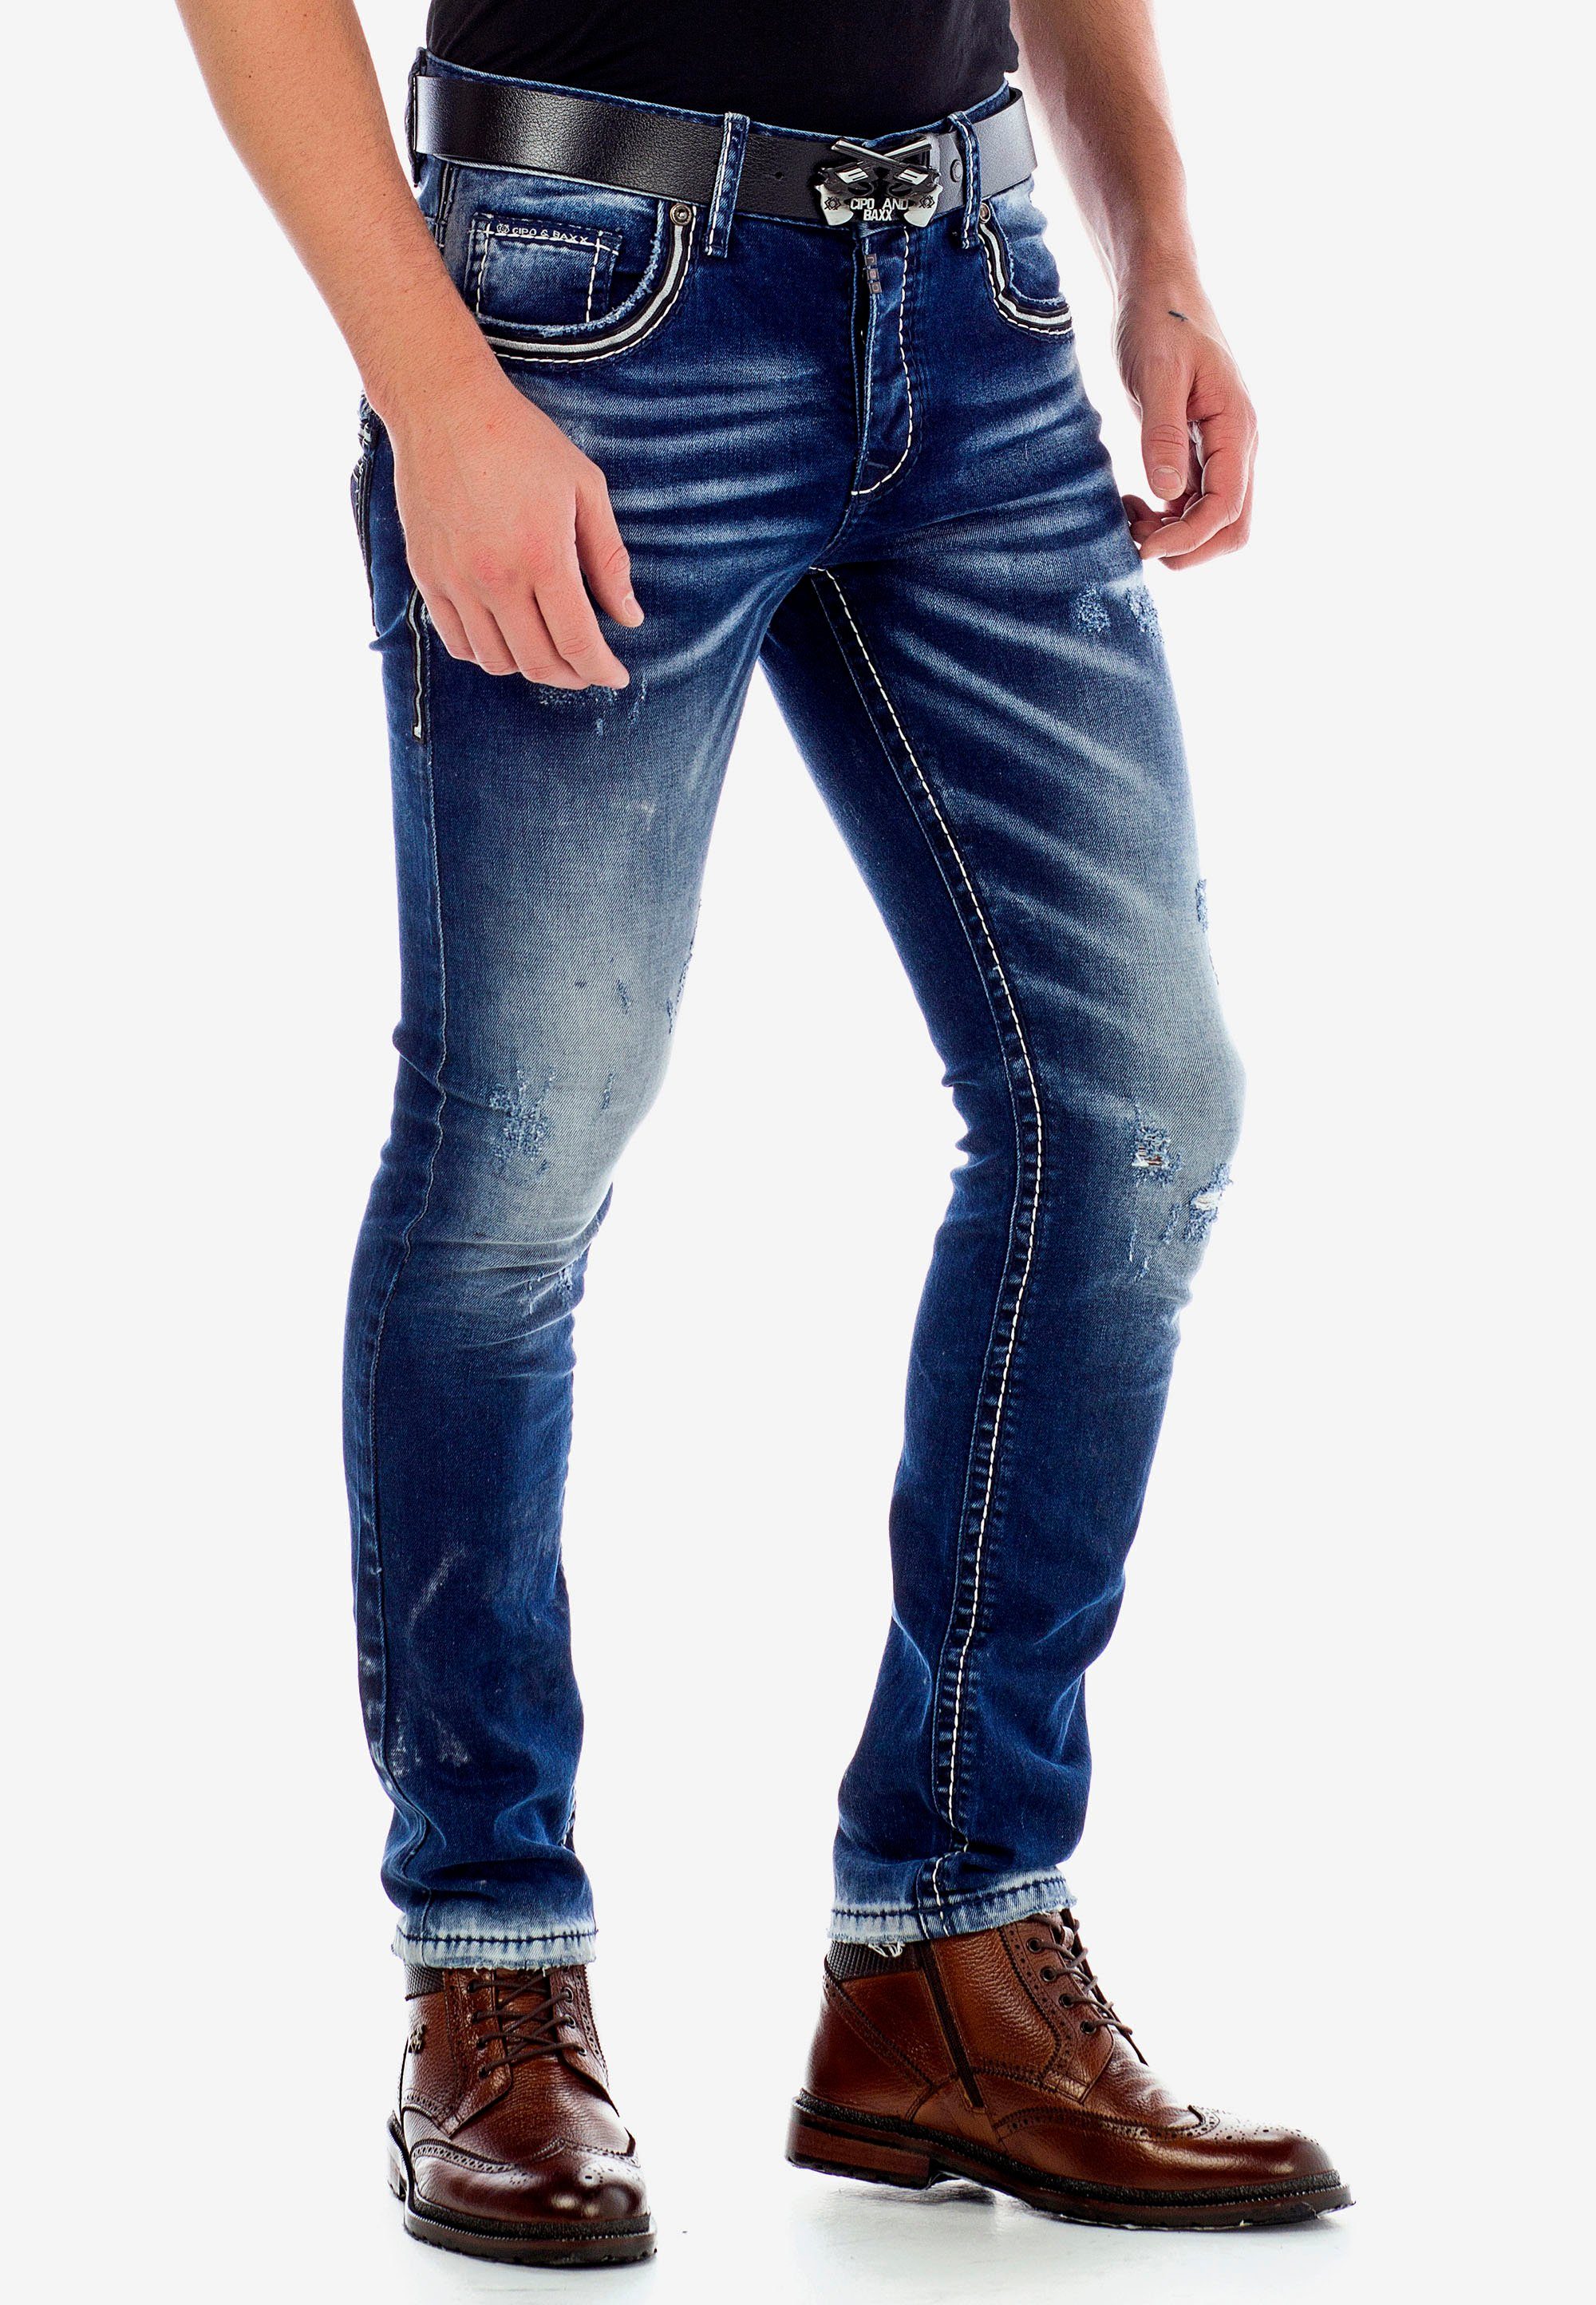 & Worn in im Fit Baxx Look Cipo Slim-fit-Jeans Straight Washed